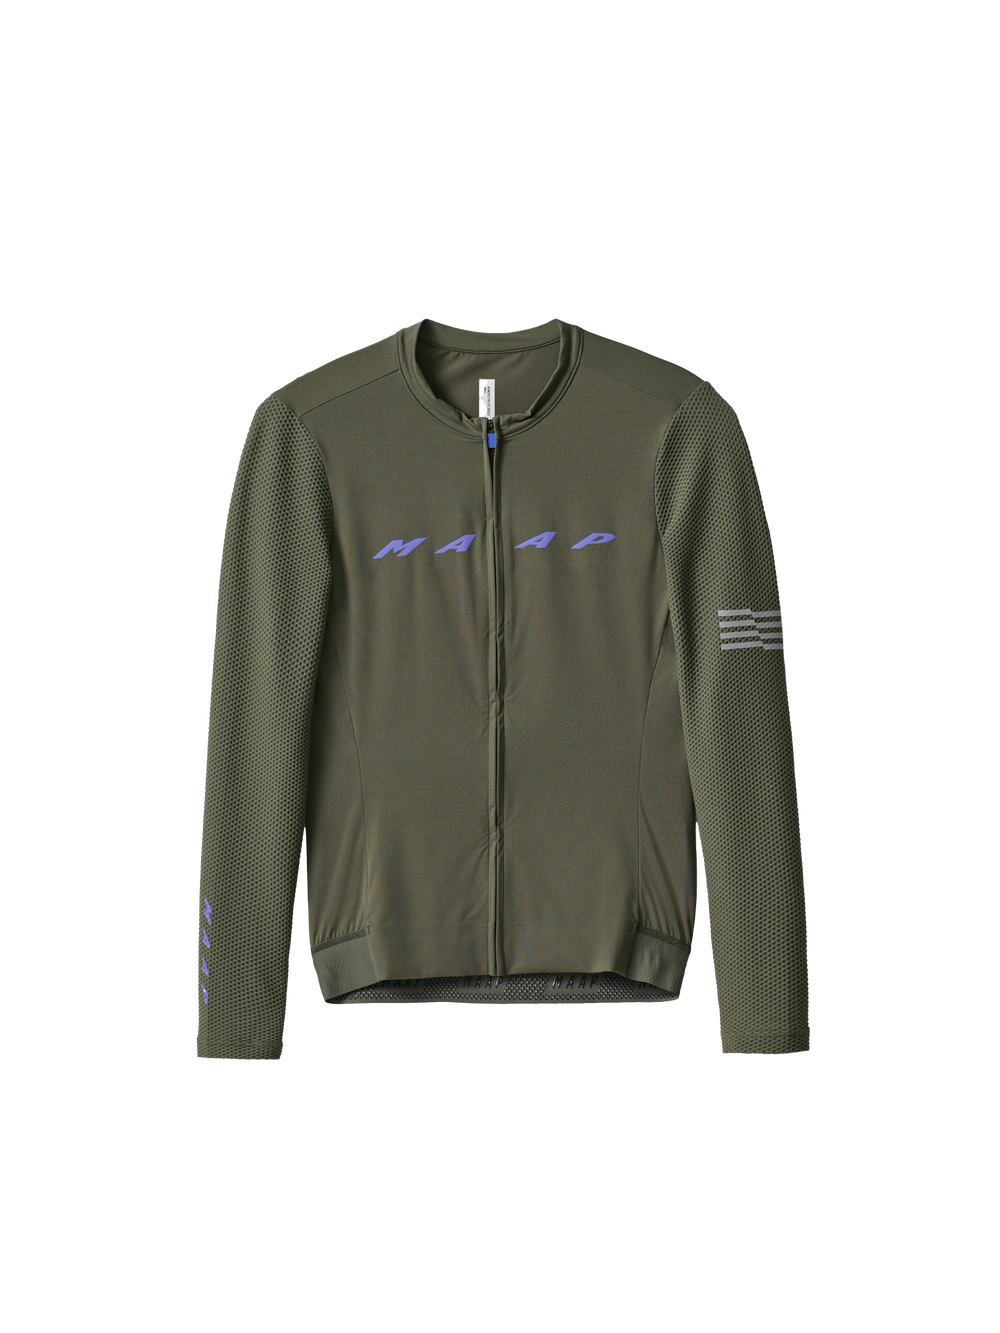 Product Image for Women's Evade Pro Base LS Jersey 2.0